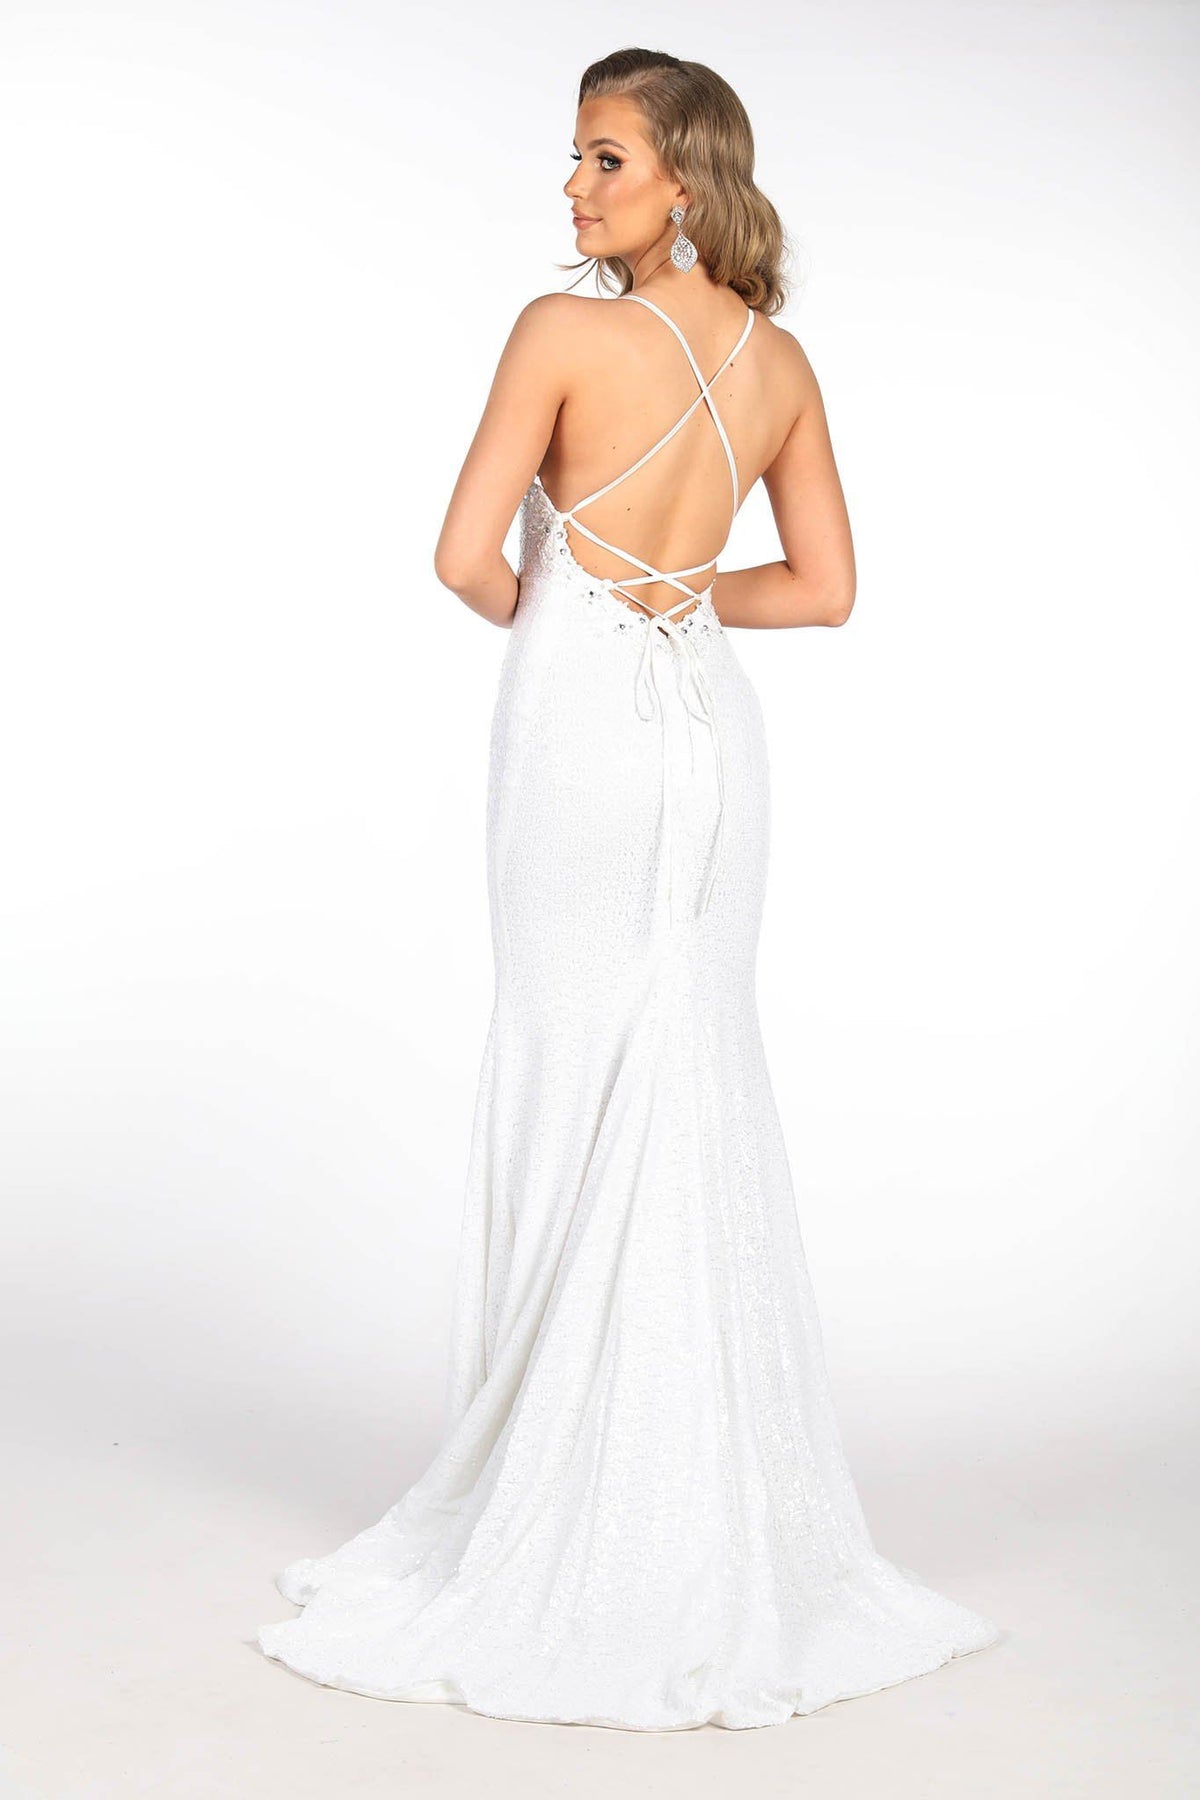 White full length sequin gown featuring hand beaded lace detail, V plunging neckline, thin straps with lace up on open back and sweep train